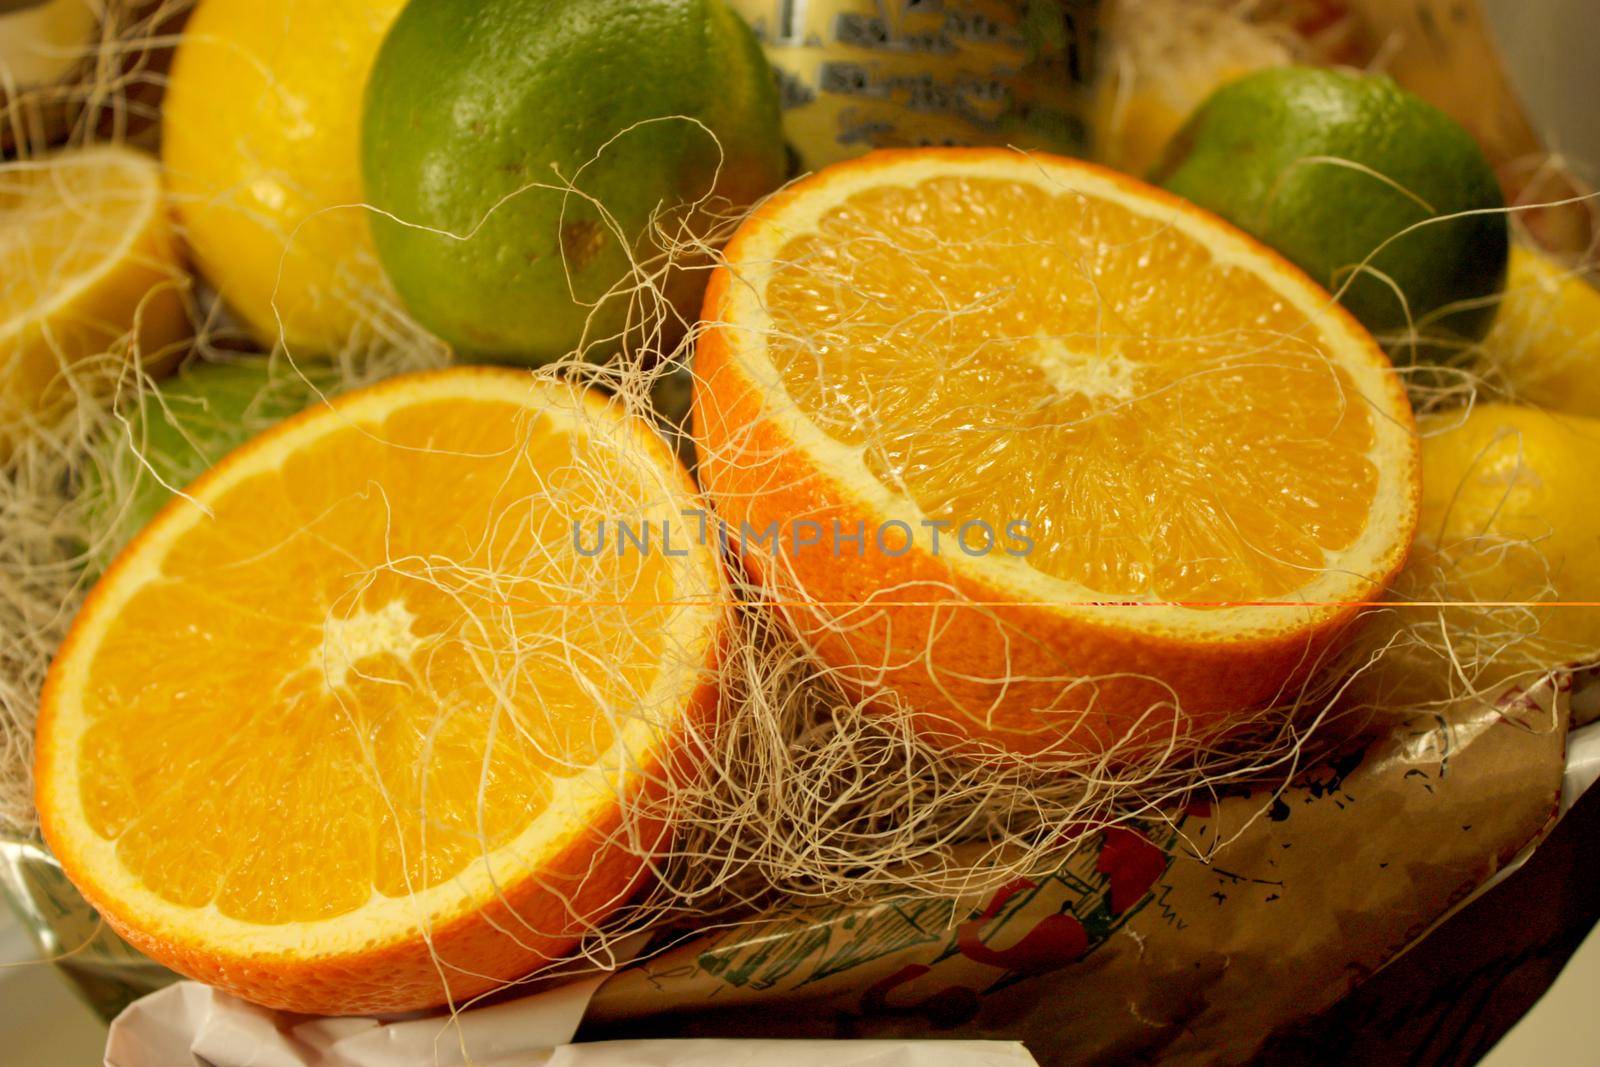 composition of two halves of oranges, two green limes and yellow lemons in the background. Close up photography